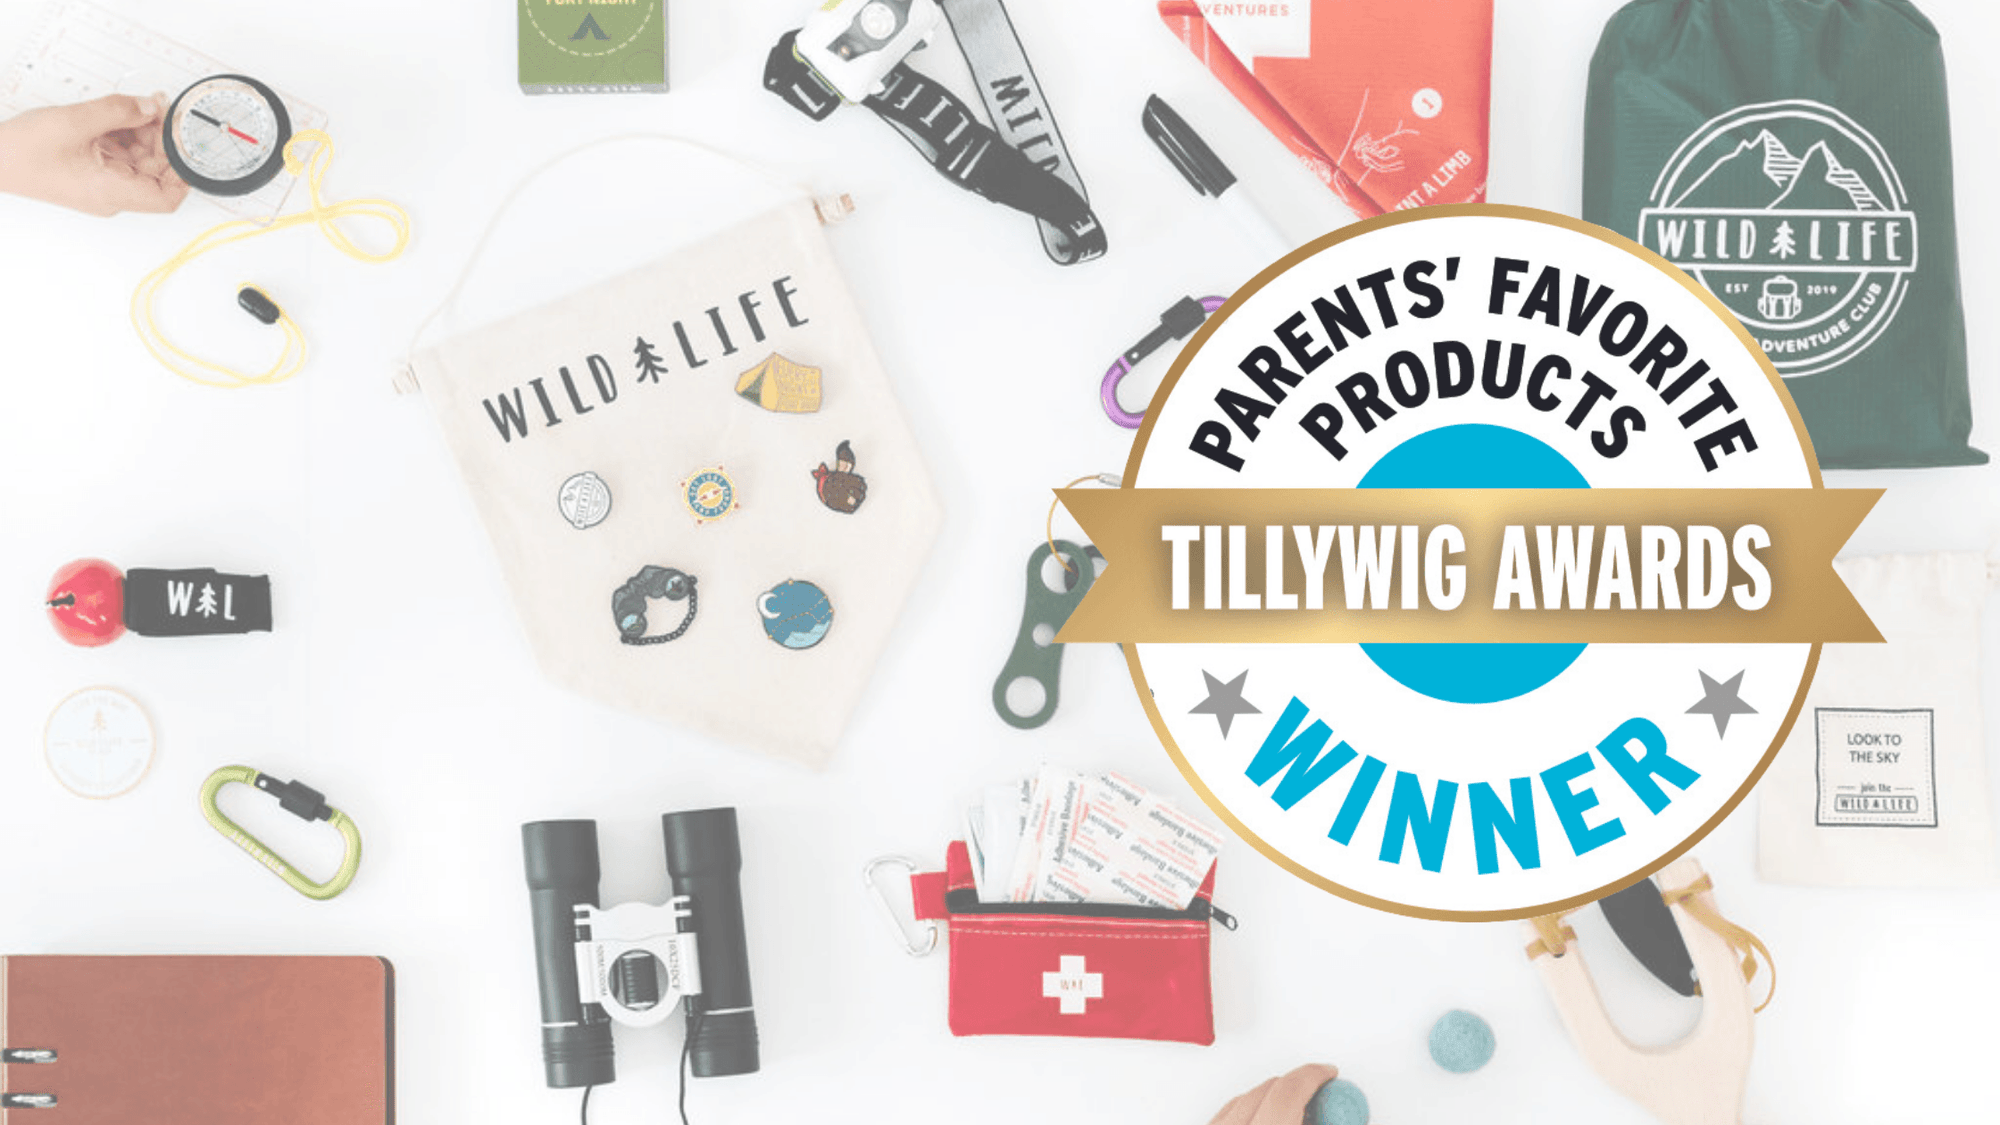 Wild | Life has earned the 2021 Tillywig Toy Award "Parent's Favourite Product" - Wild | Life Outdoor Adventures